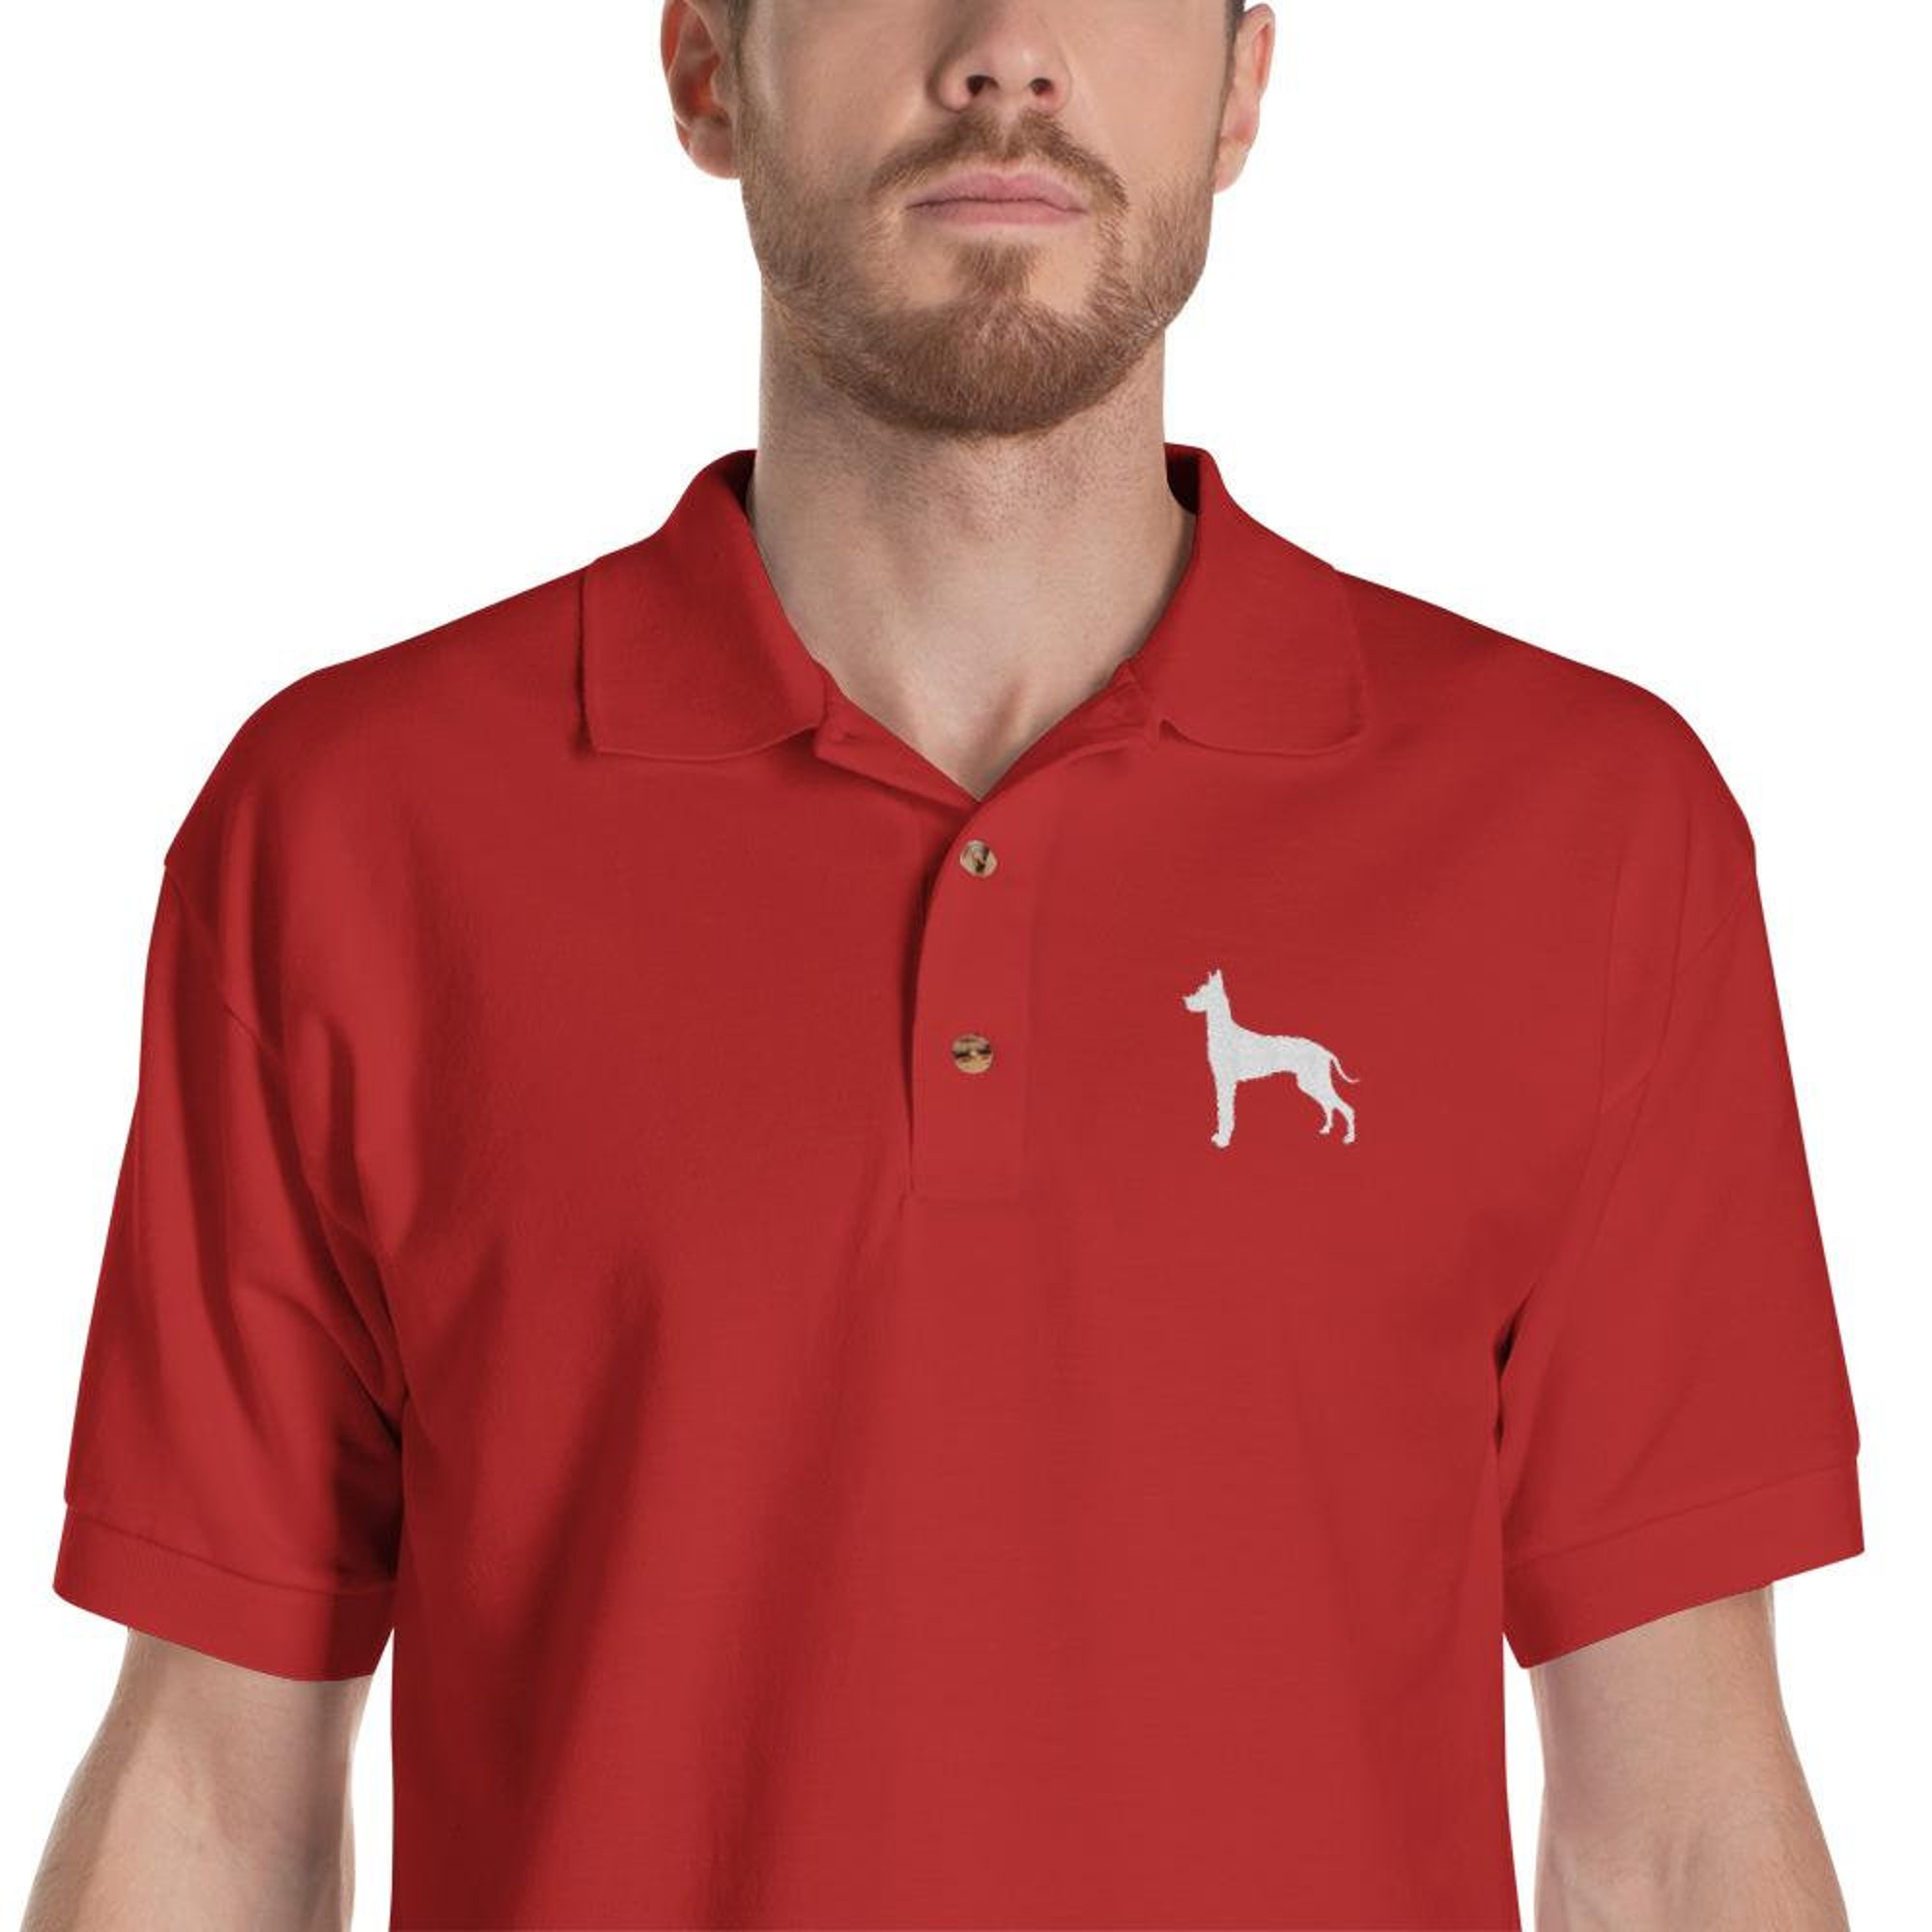 Great Dane Embroidered Polo Shirt